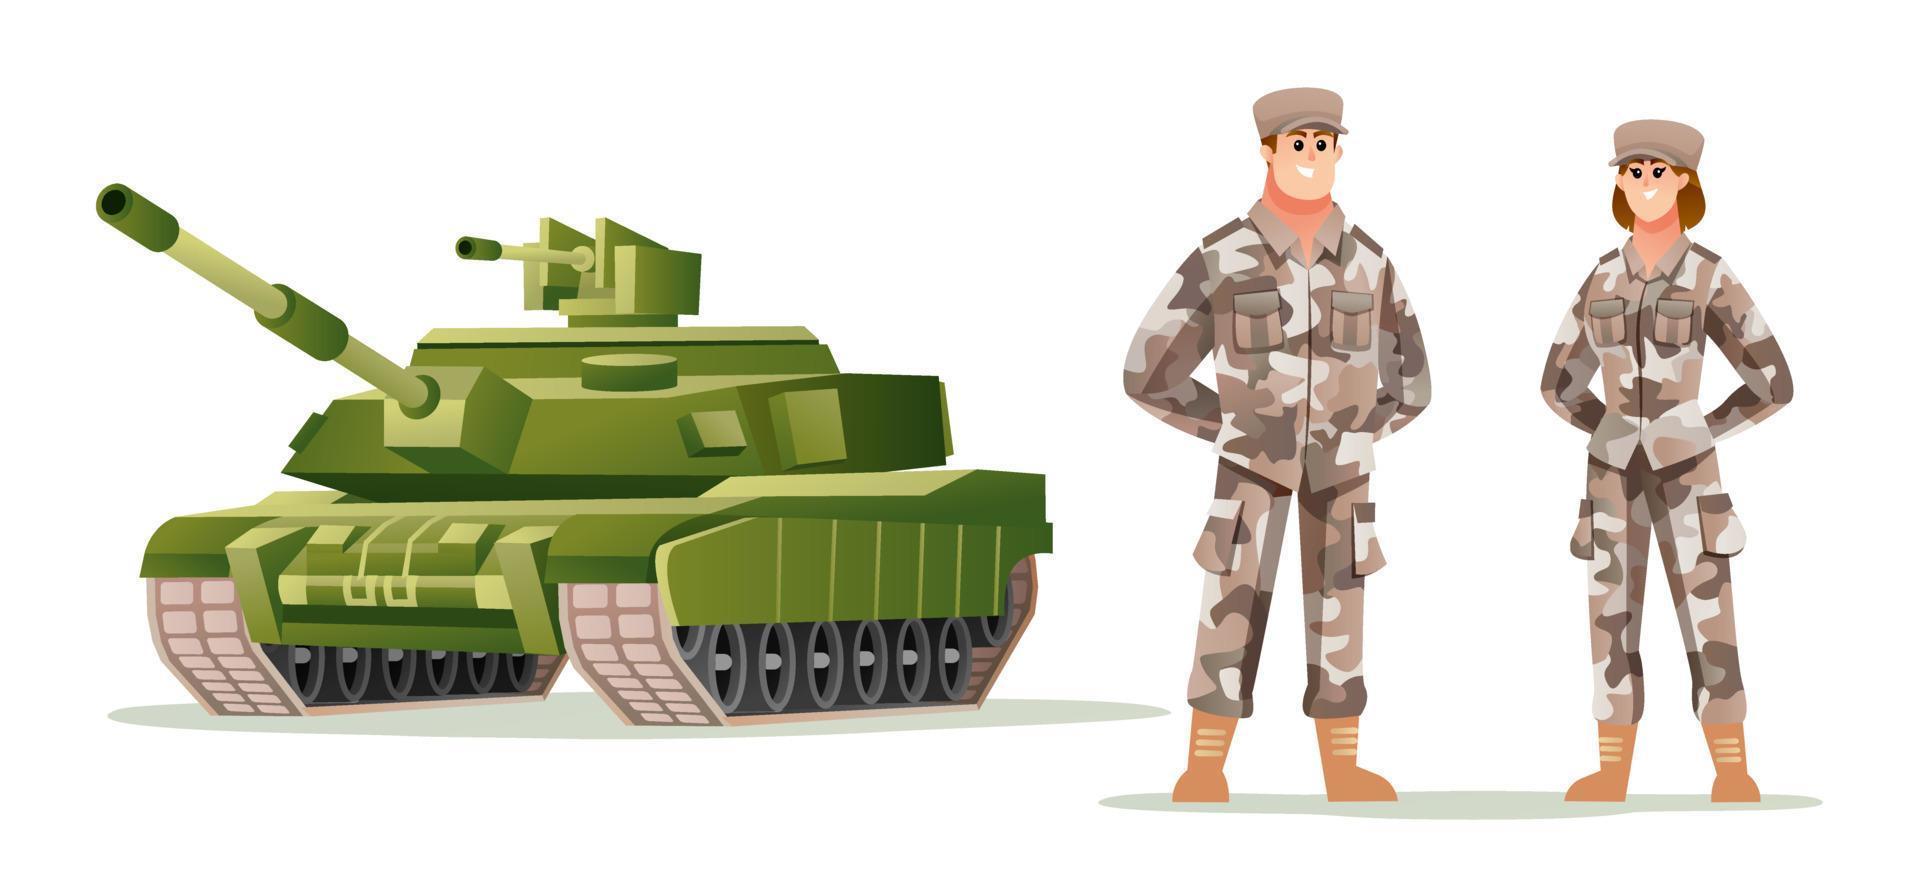 Man and woman army soldier characters with tank cartoon illustration vector